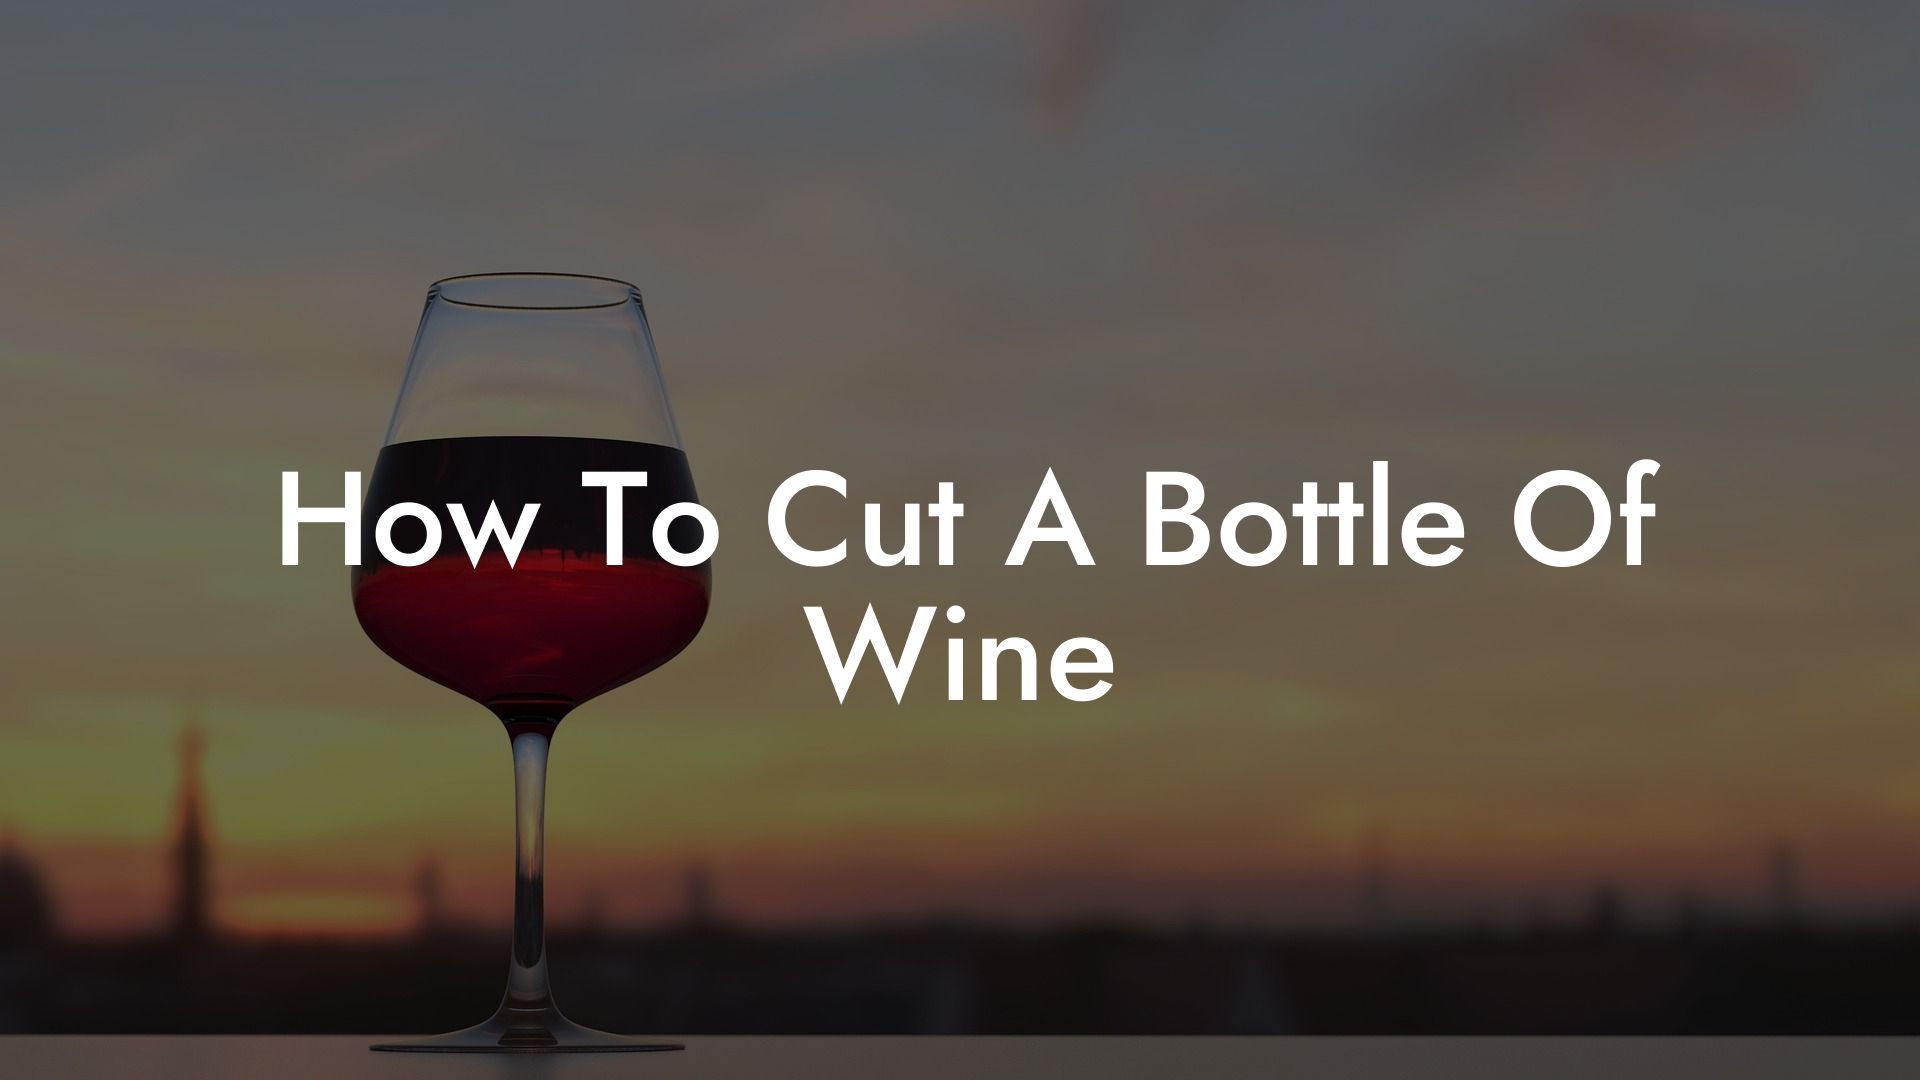 How To Cut A Bottle Of Wine